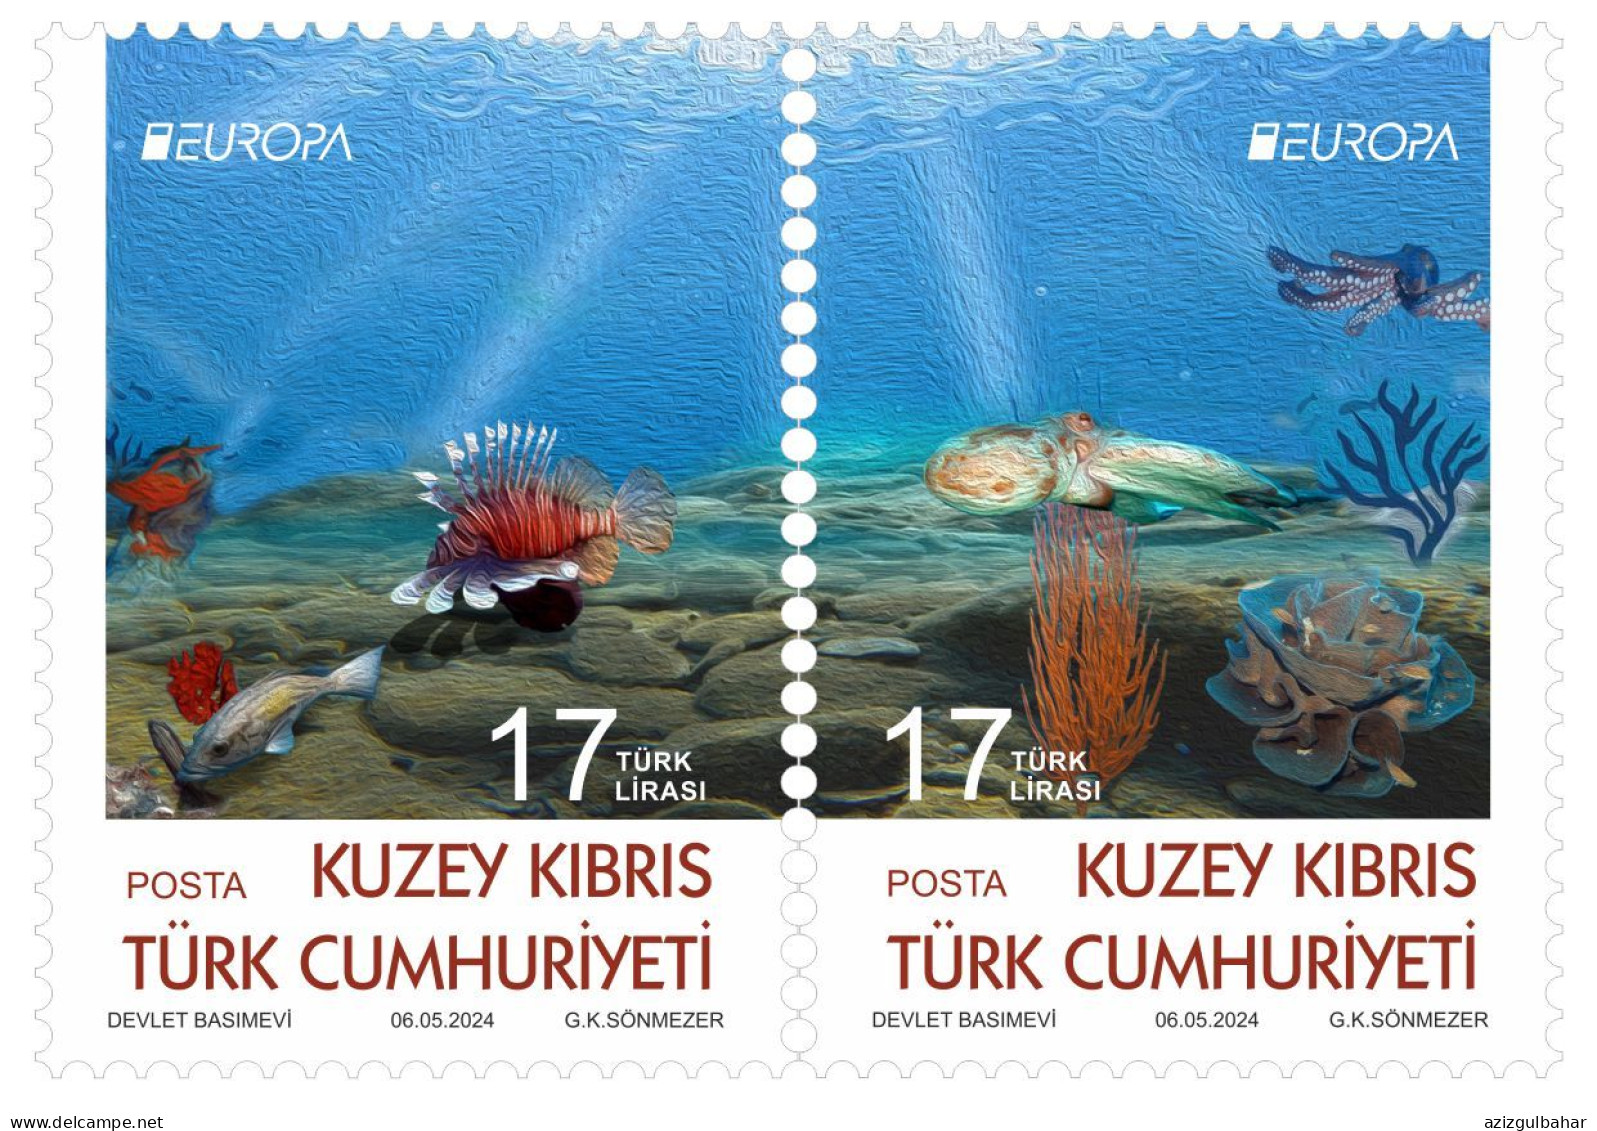 2024 -UNDERWATER FAUNA AND FLORA - STAMPS - 2024